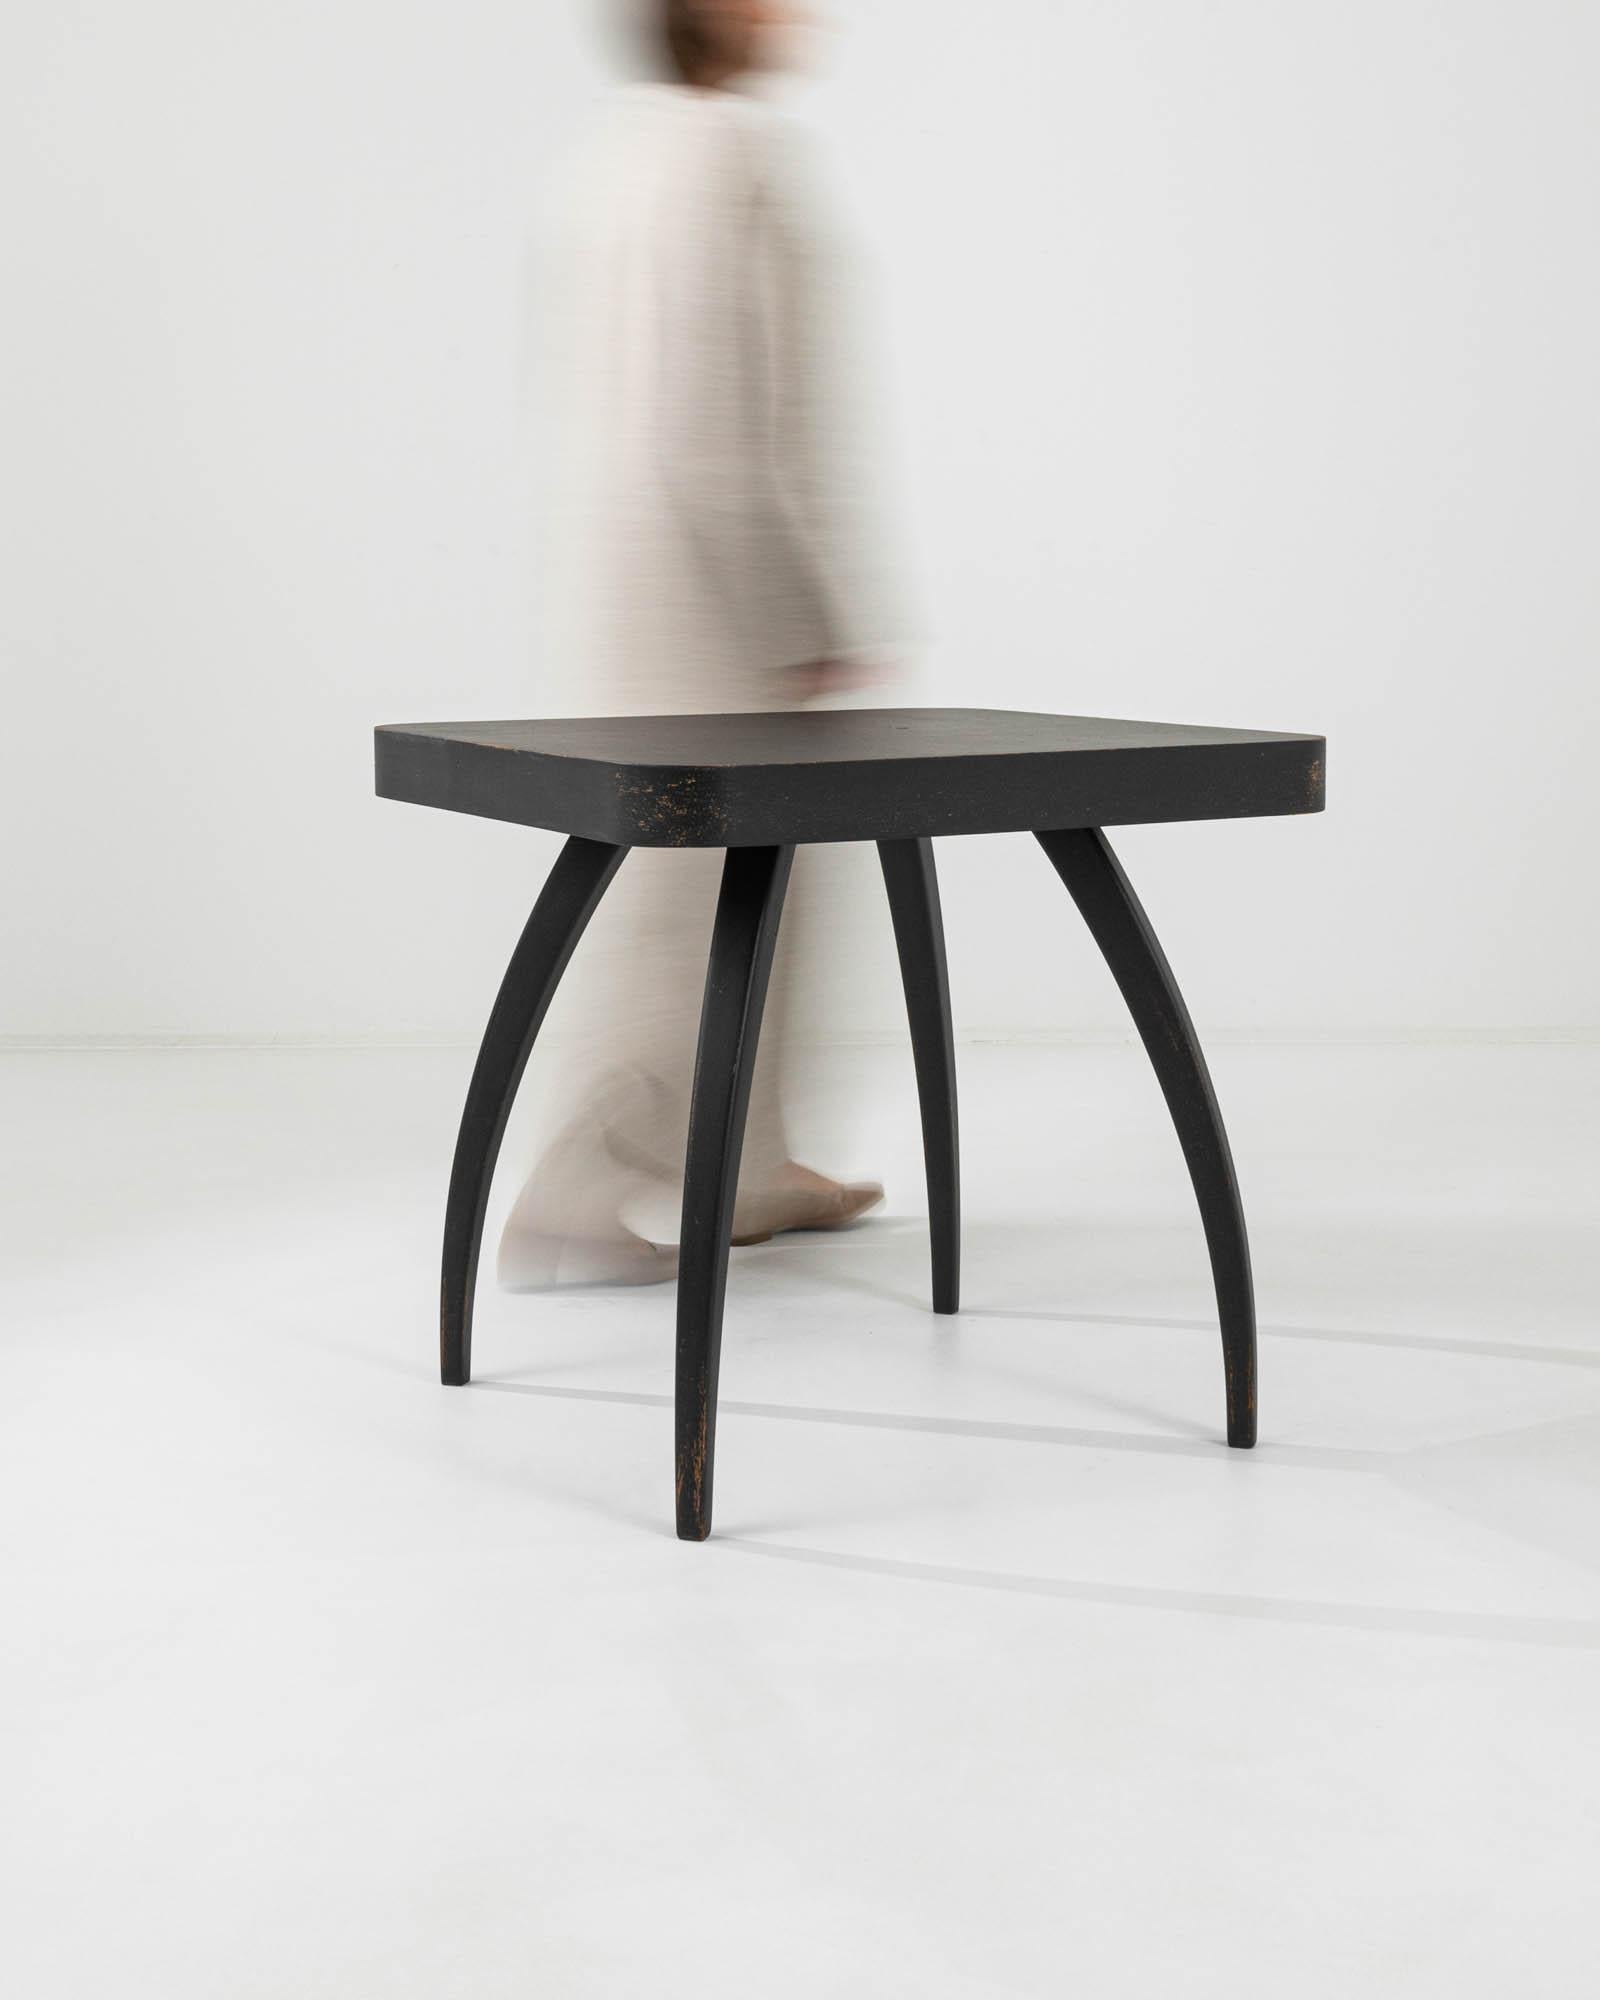 Wood Mid-20th Century Czech Spider Table by J. Halabala For Sale